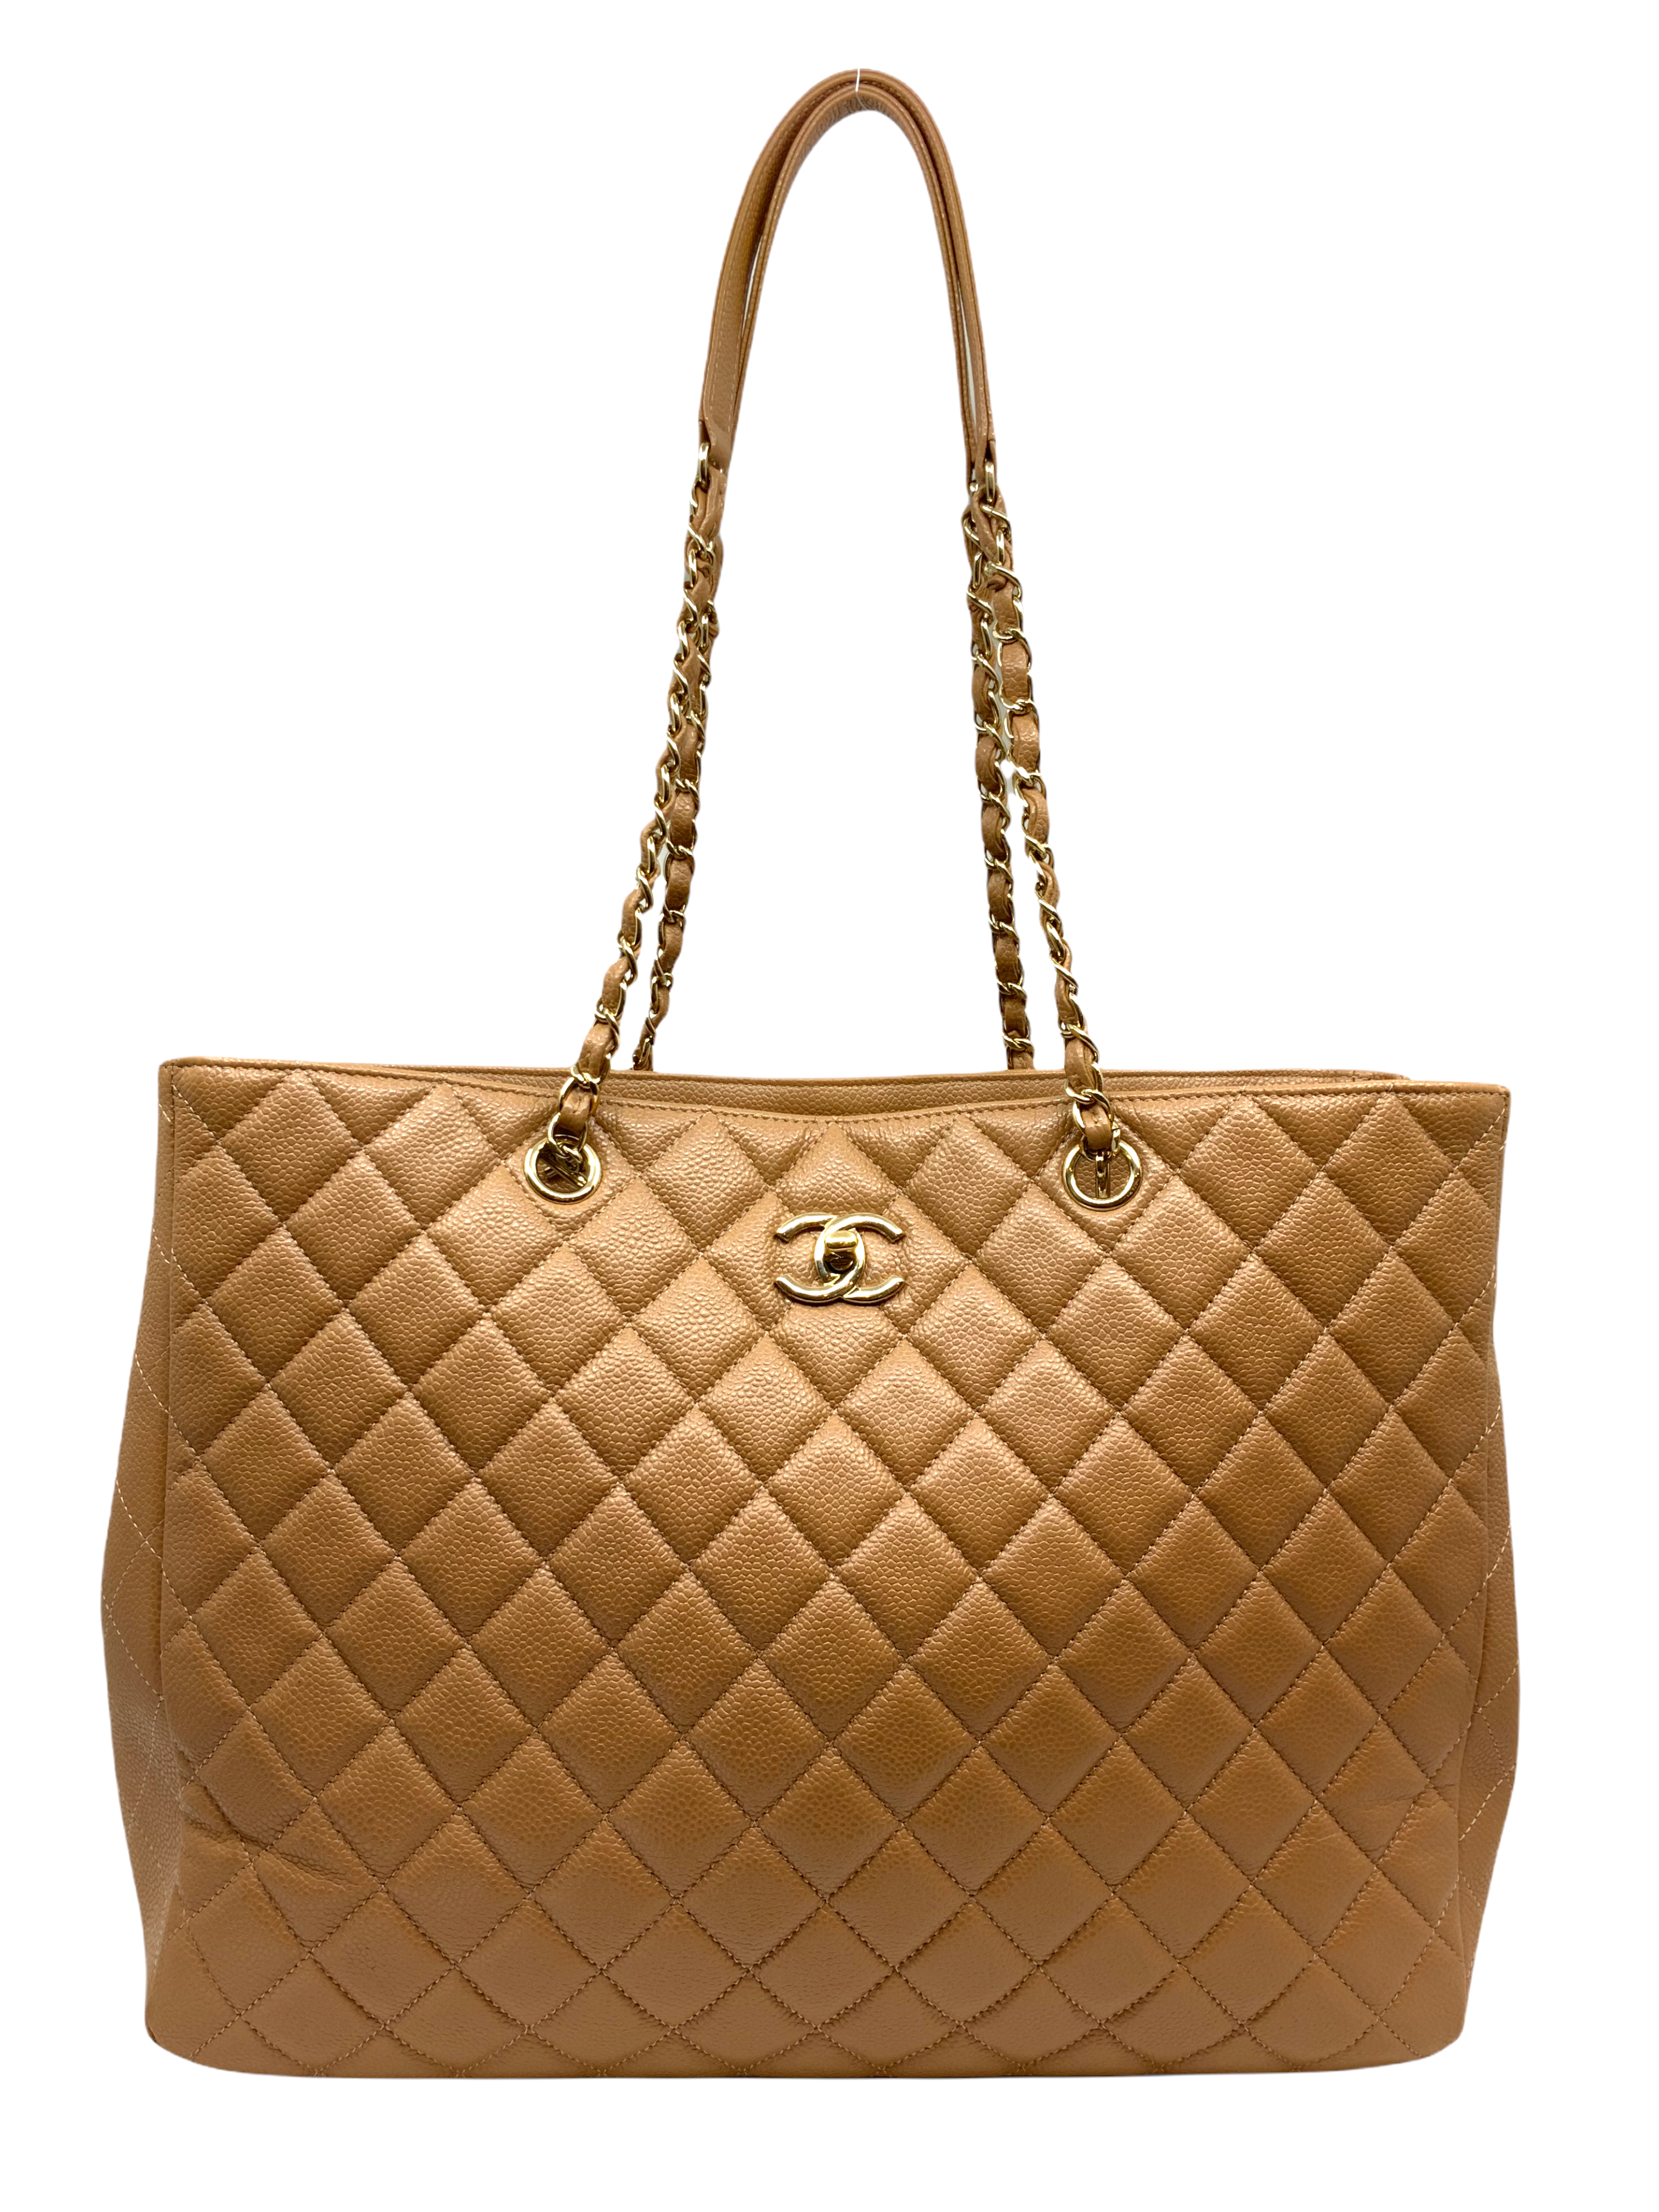 Chanel Calfskin Quilted Large CC Shopping Tote